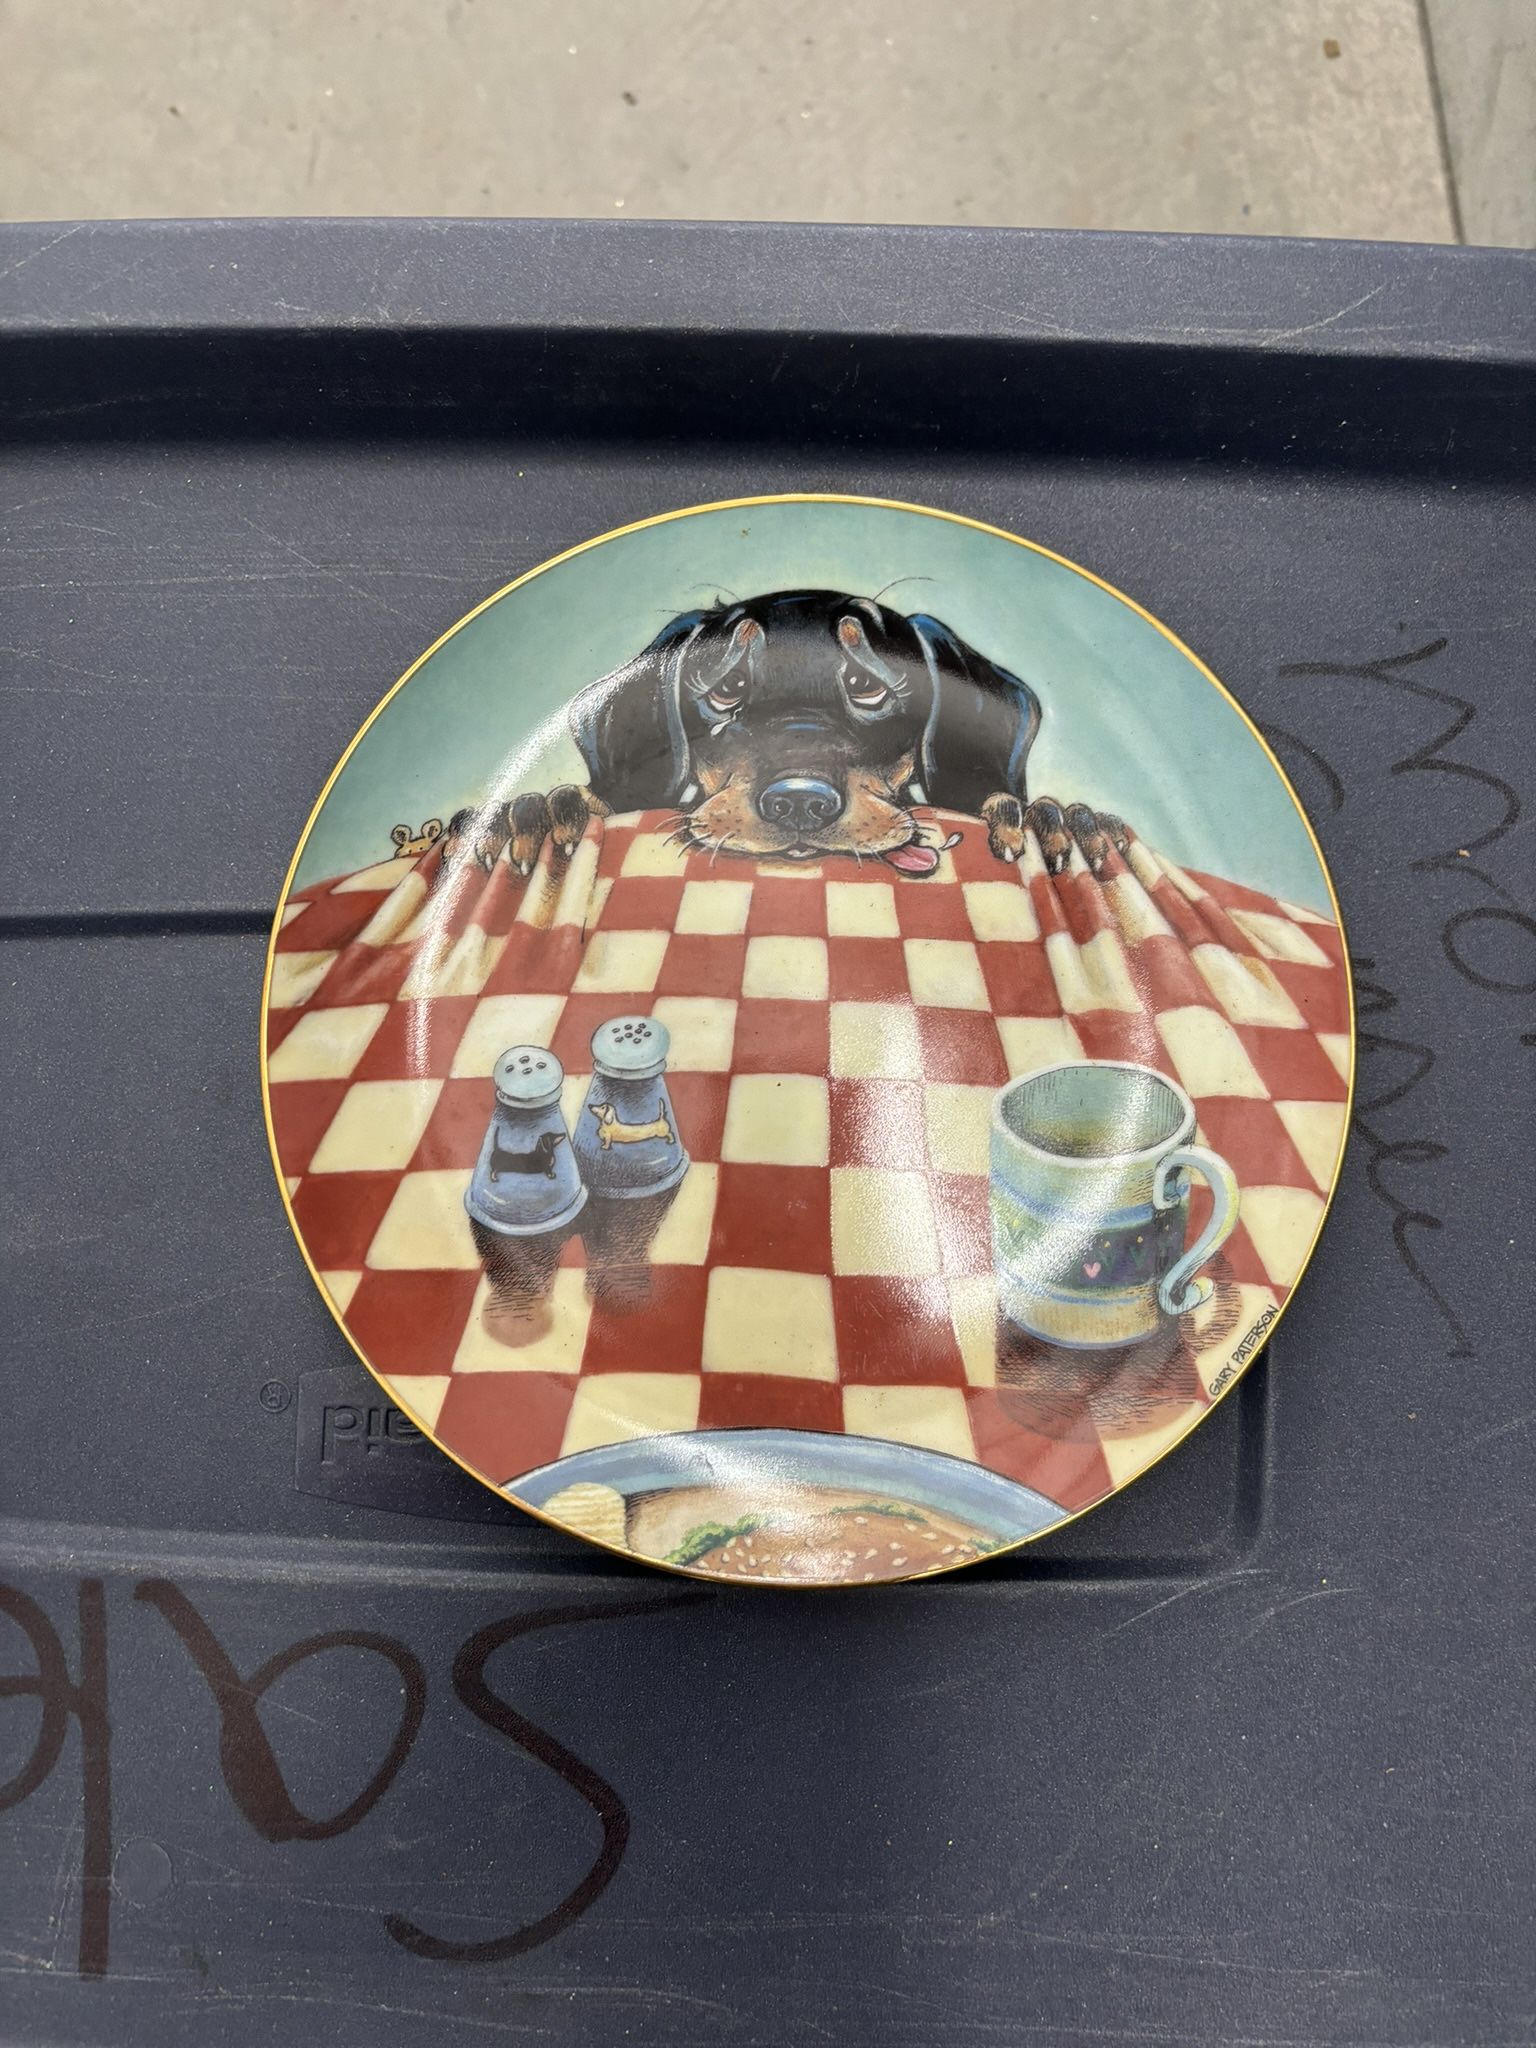 Art By Gary Patterson For Danbury Mint Limited Edition China Plate From Collection “Patterson Dachshund “ “ Hungry Hound”